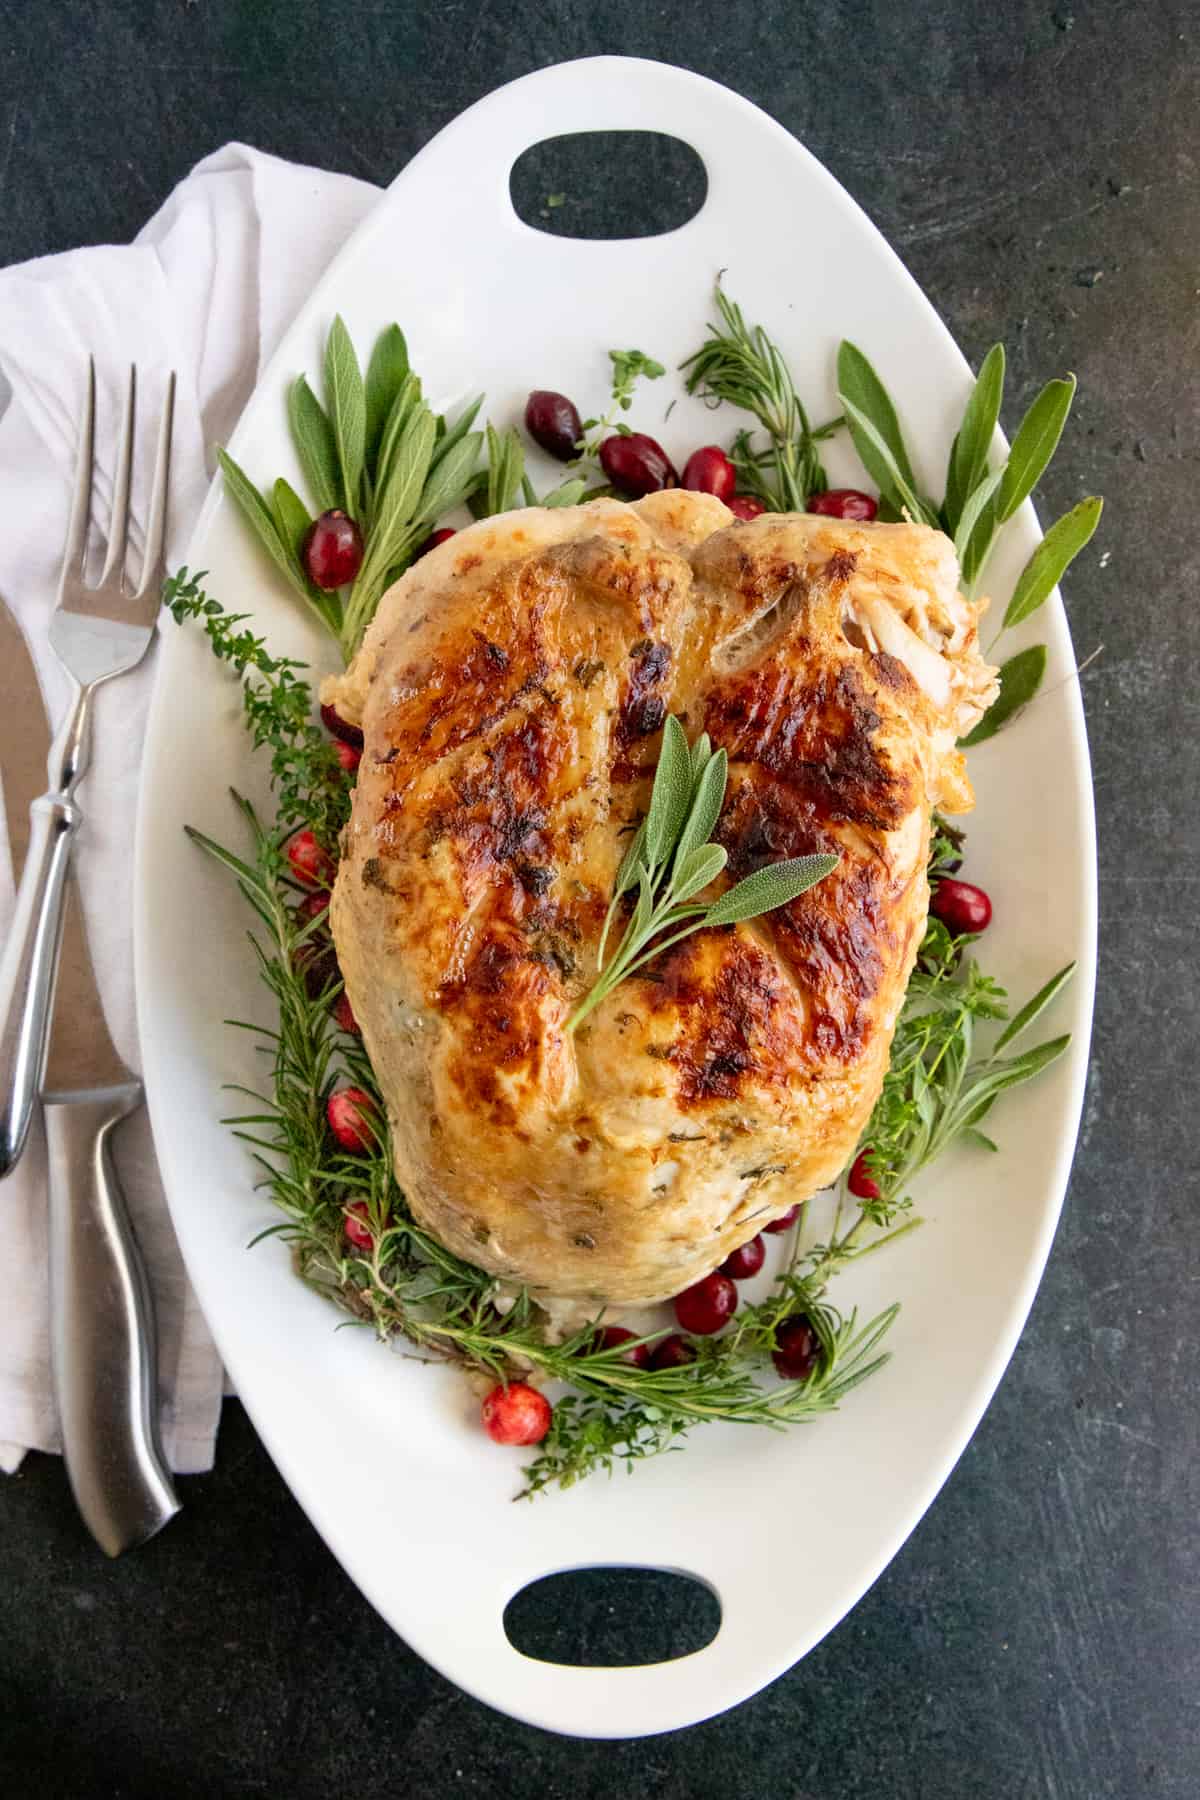 Cooked Instant Pot turkey breast on a bed of herbs and cranberries on a white platter.